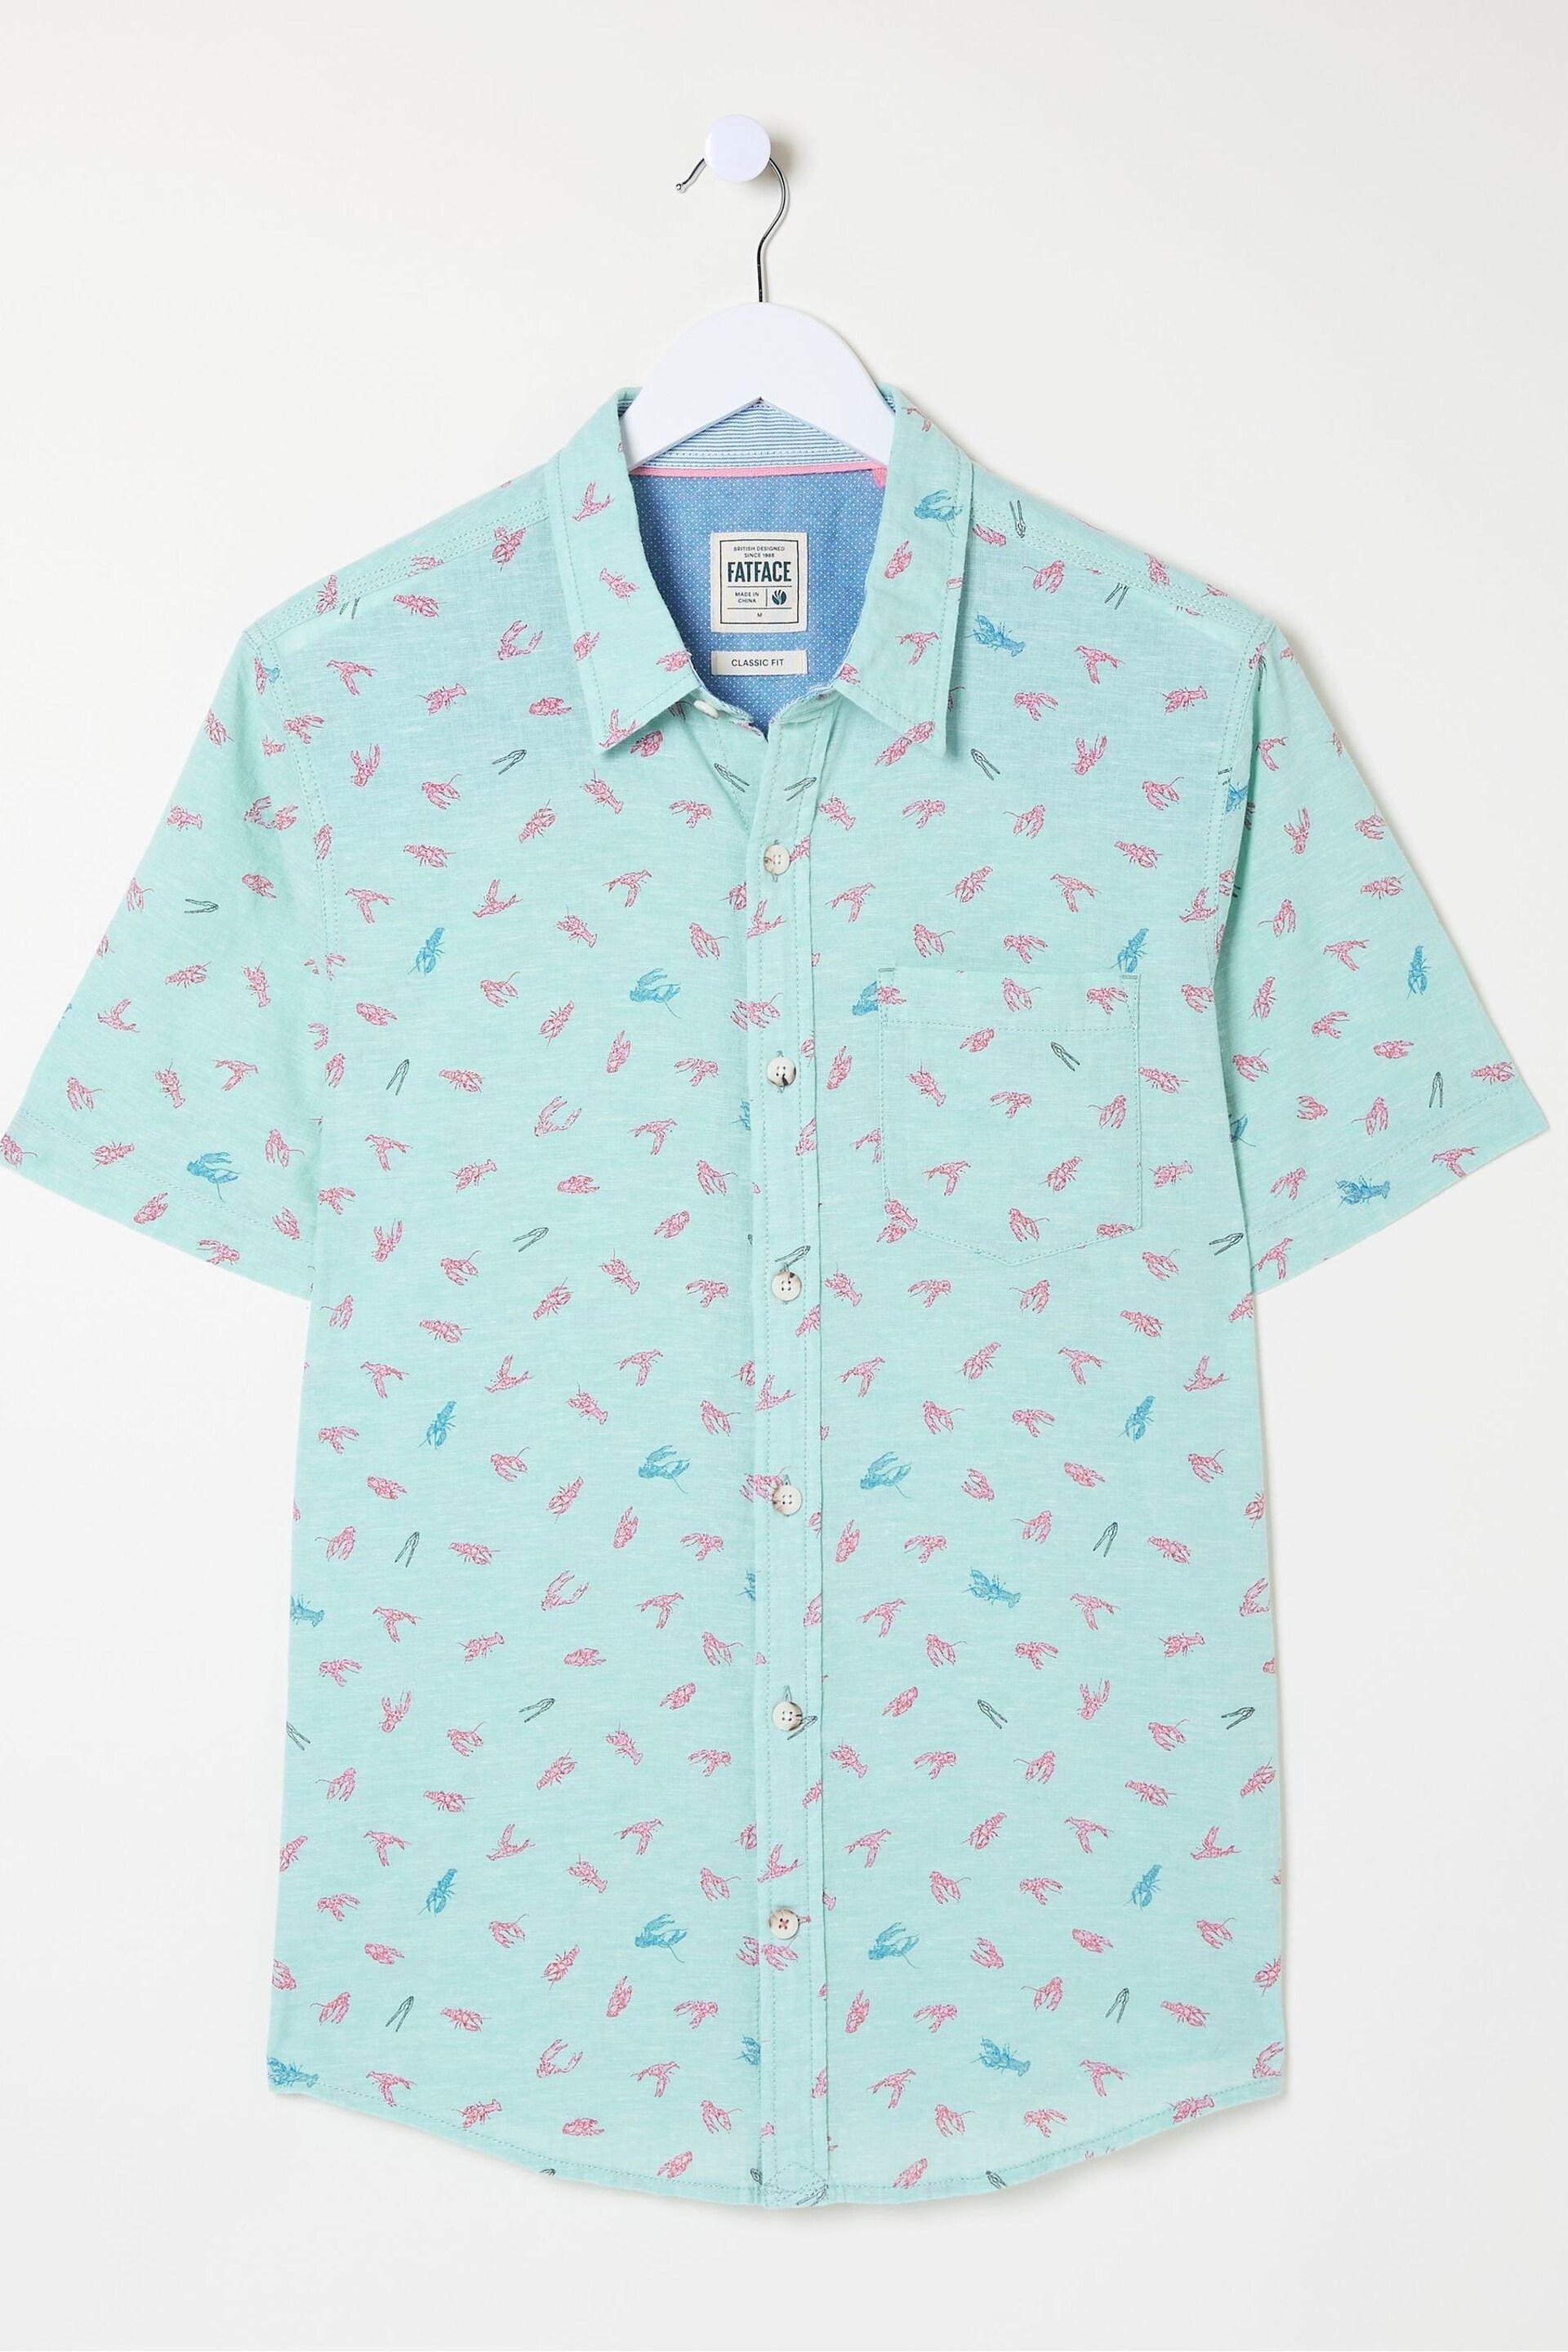 FatFace Blue Cracking Lobster Print Shirt - Image 5 of 5